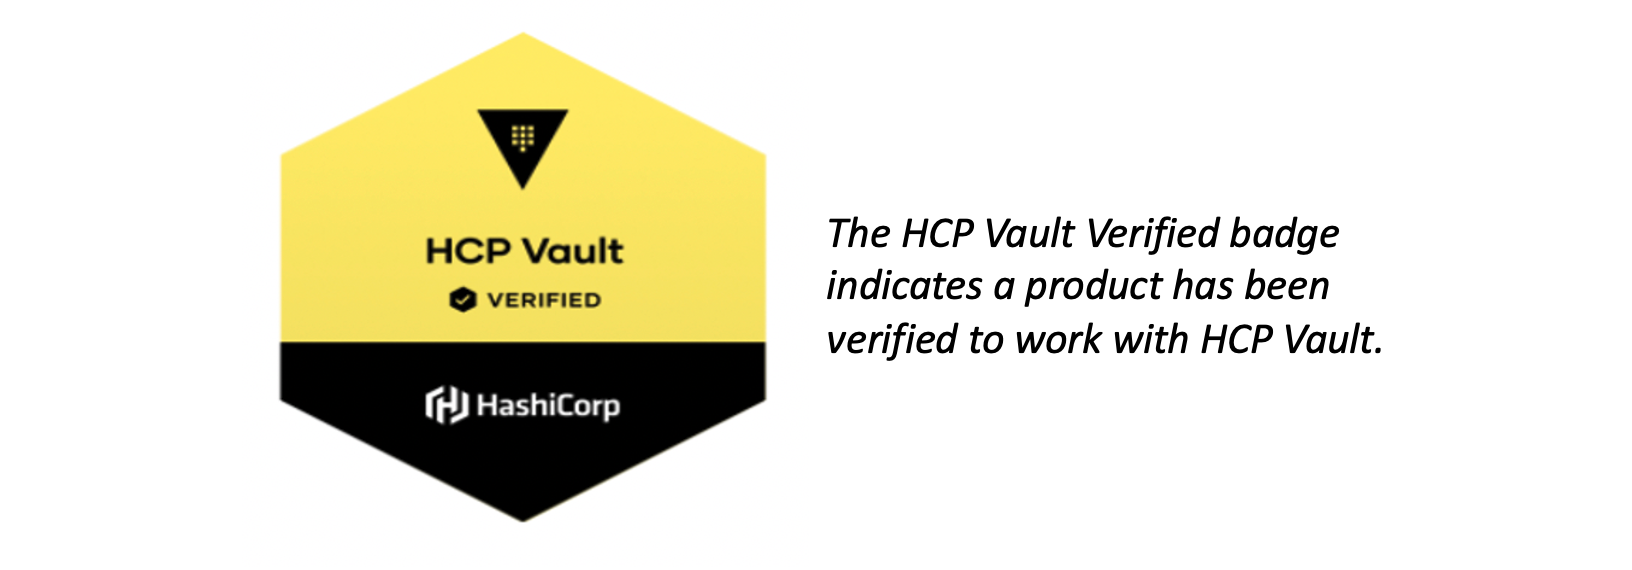 The HCP Vault Verified badge indicates a product has been verified to work with HCP Vault.